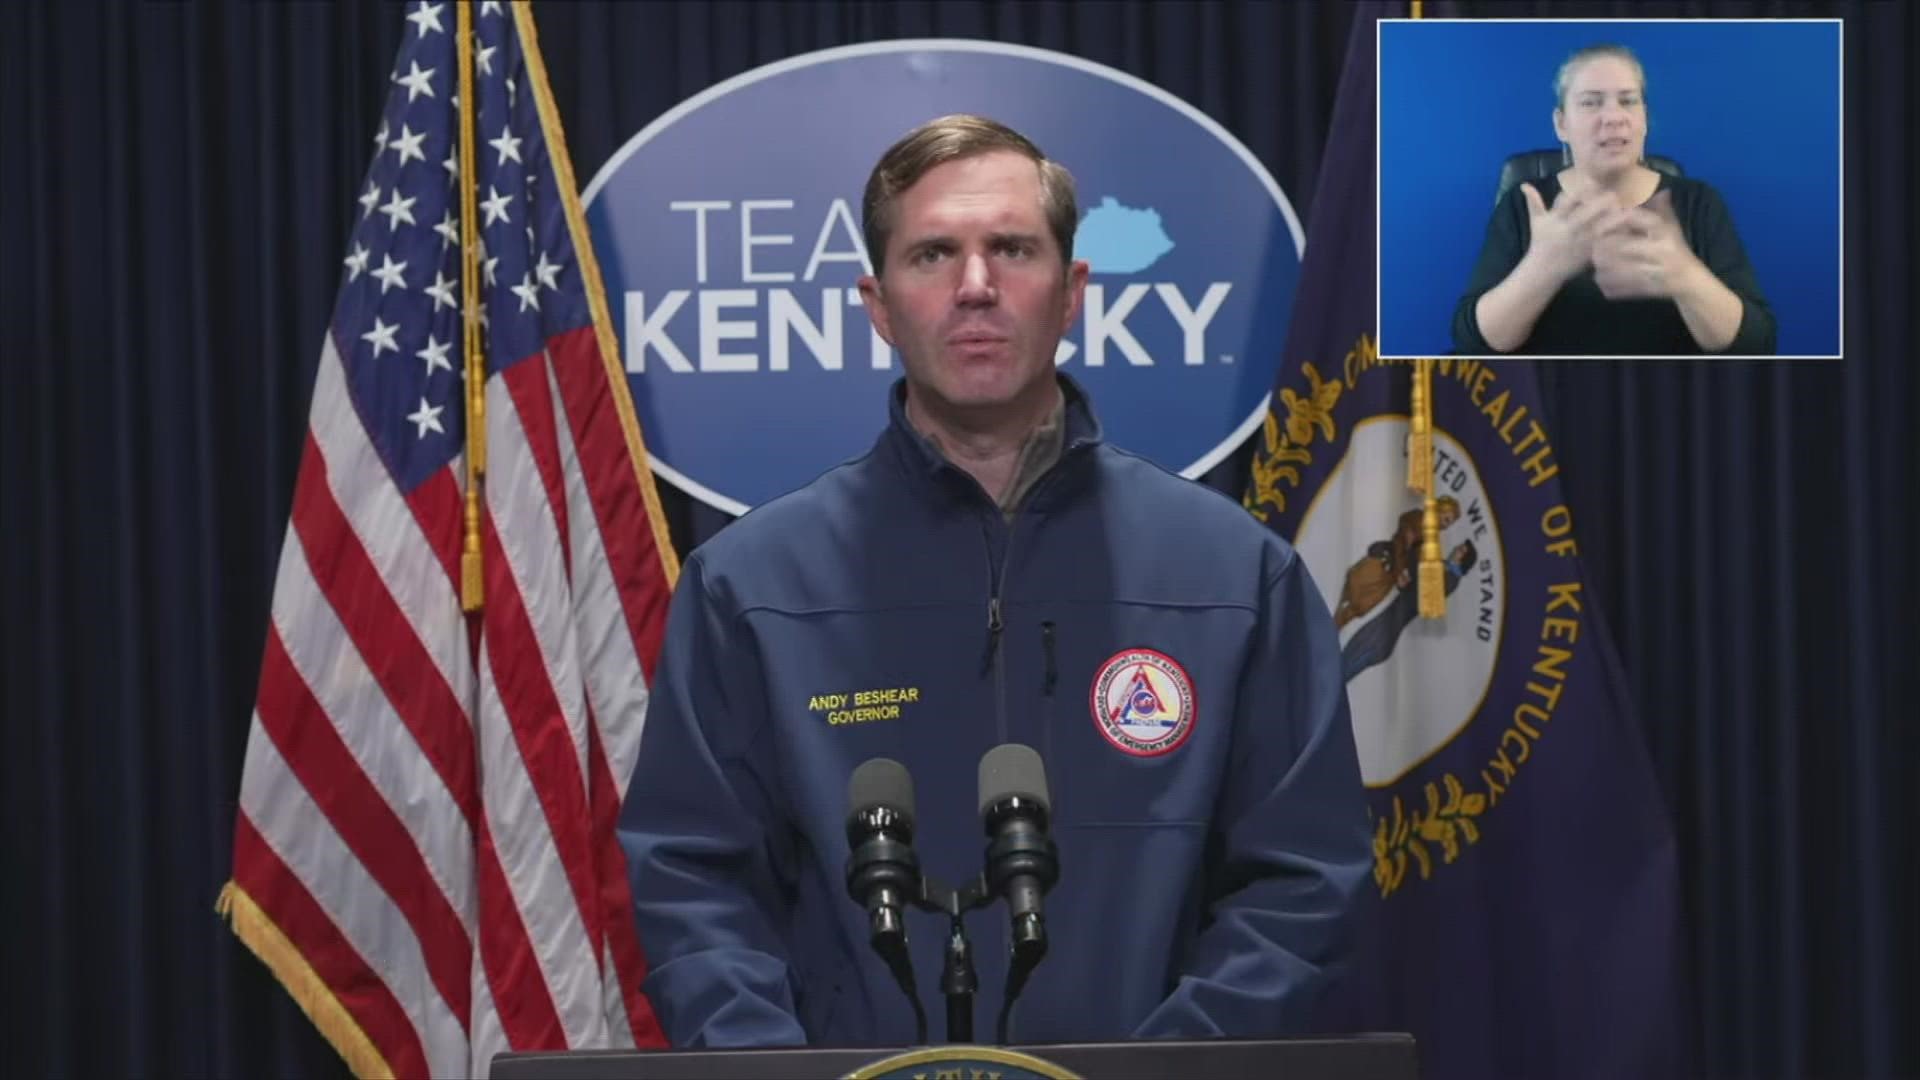 Kentucky Governor Andy Beshear said dozens of fatalities were expected after strong storms. This is a press conference held Saturday morning.